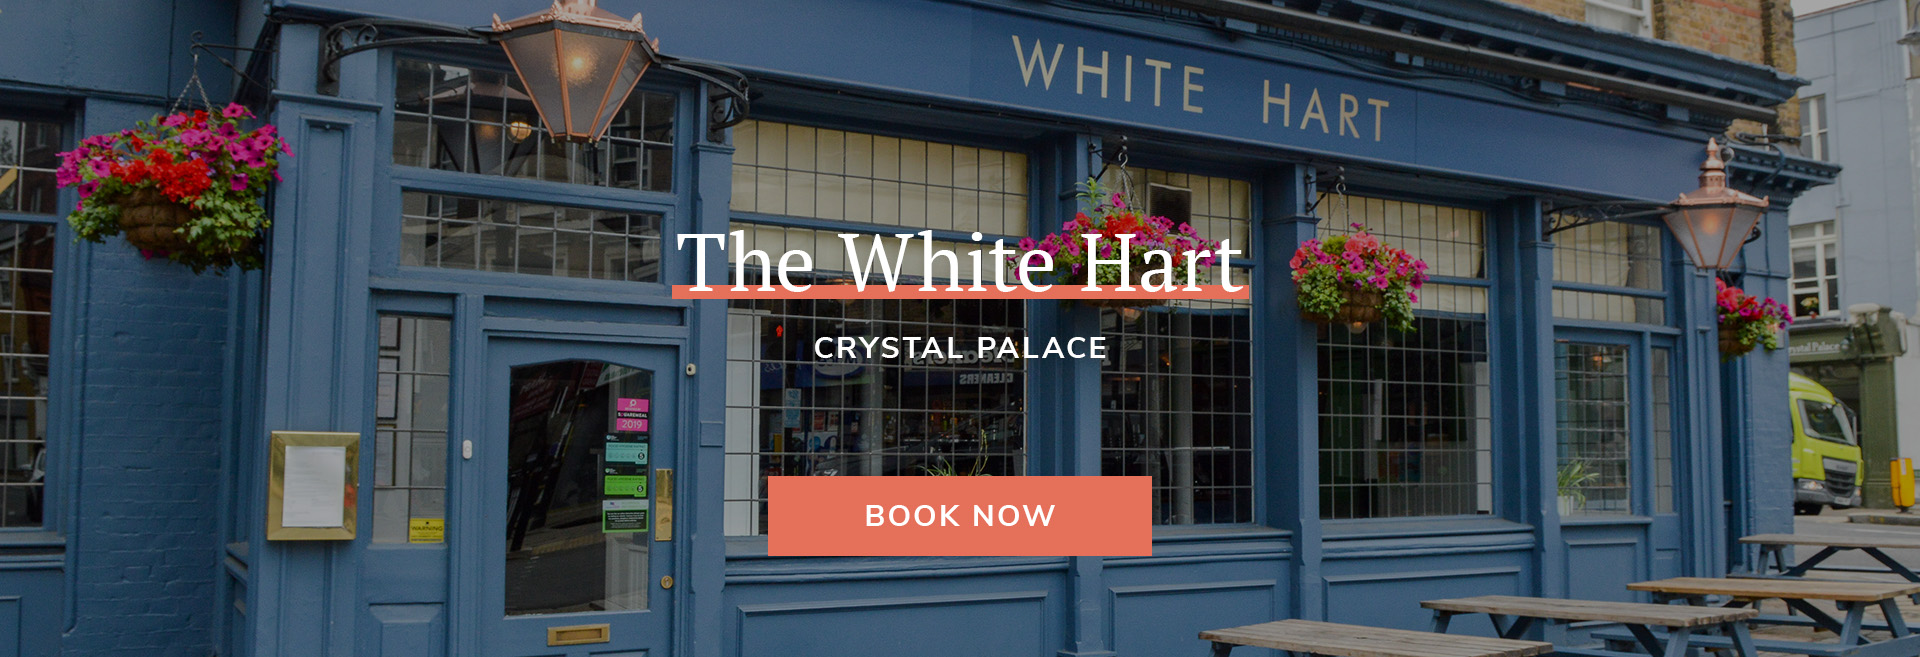 The White Hart Crystal Palace Banner 1